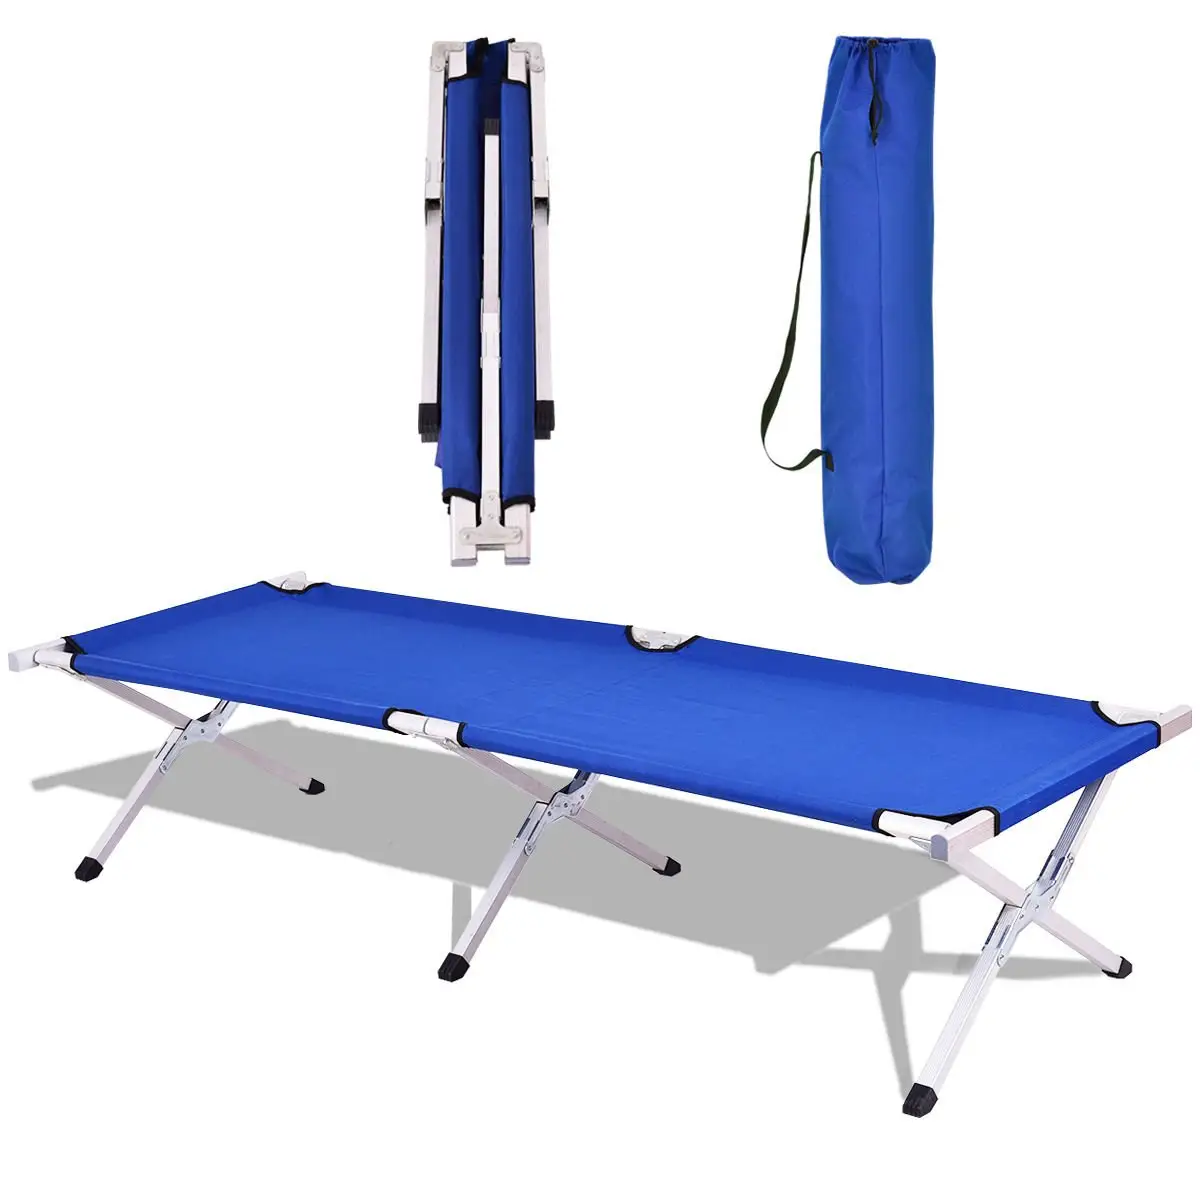 Portable folding foldable aluminum stretcher camping bed with 600D carrying bag